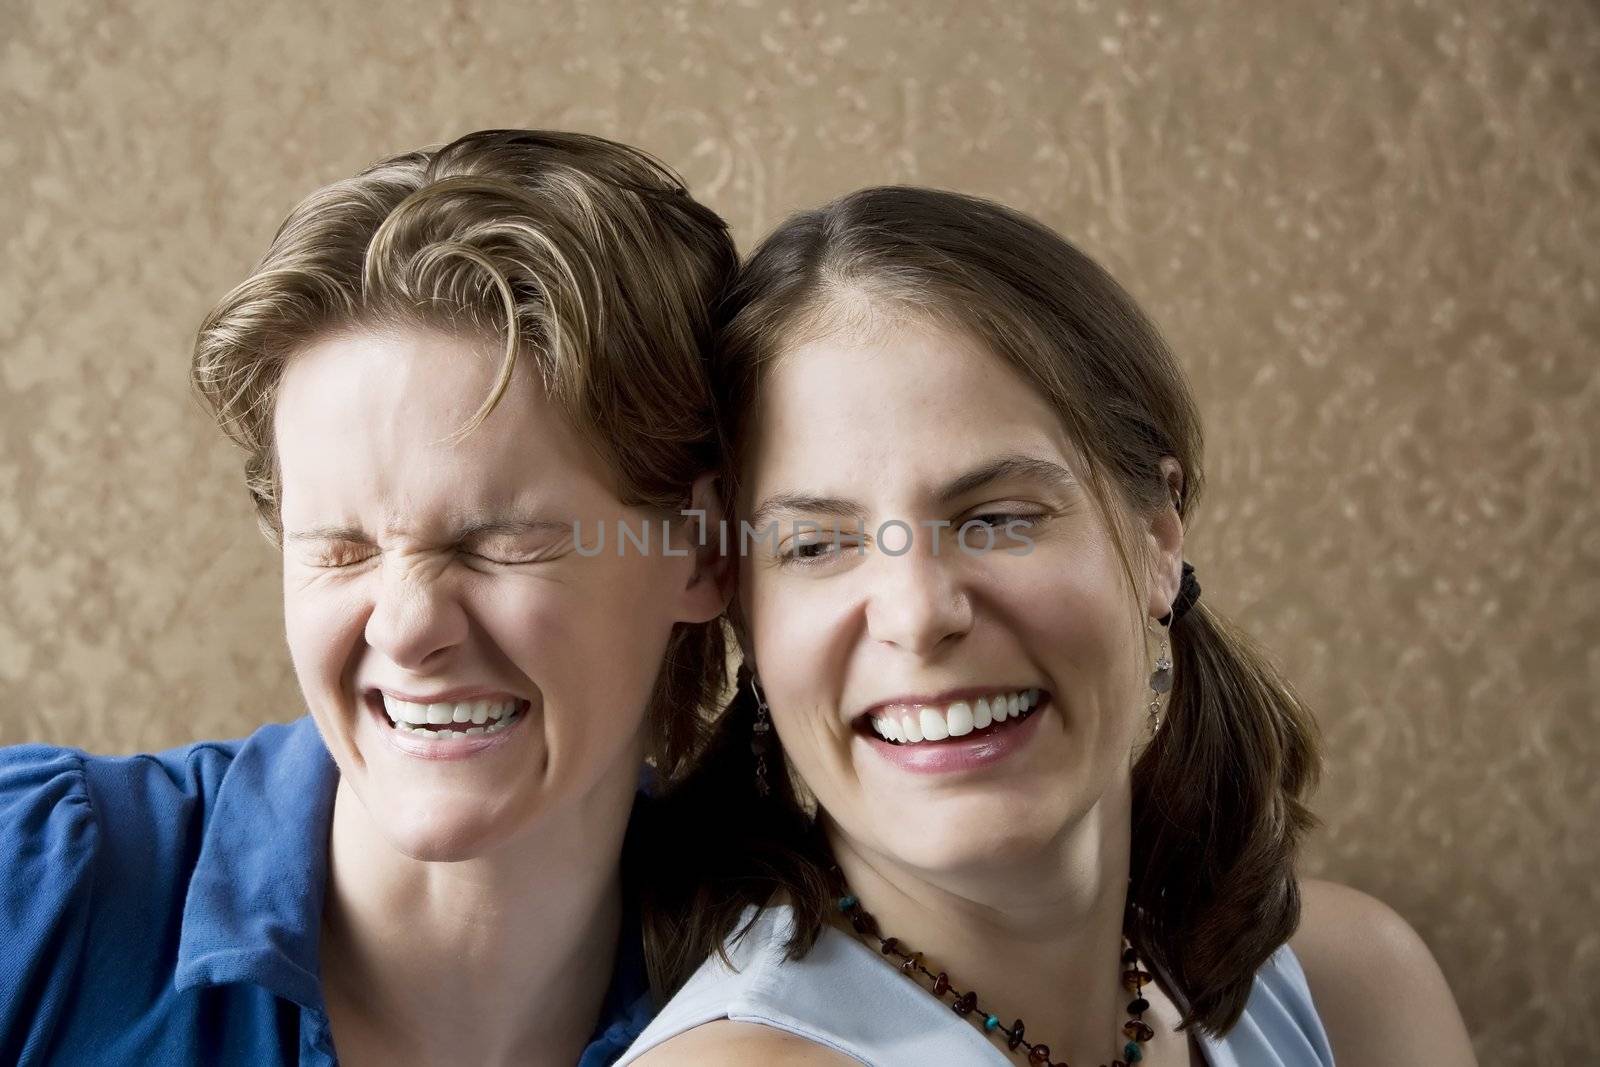 Portrait of Two Young Women Friends Laughing